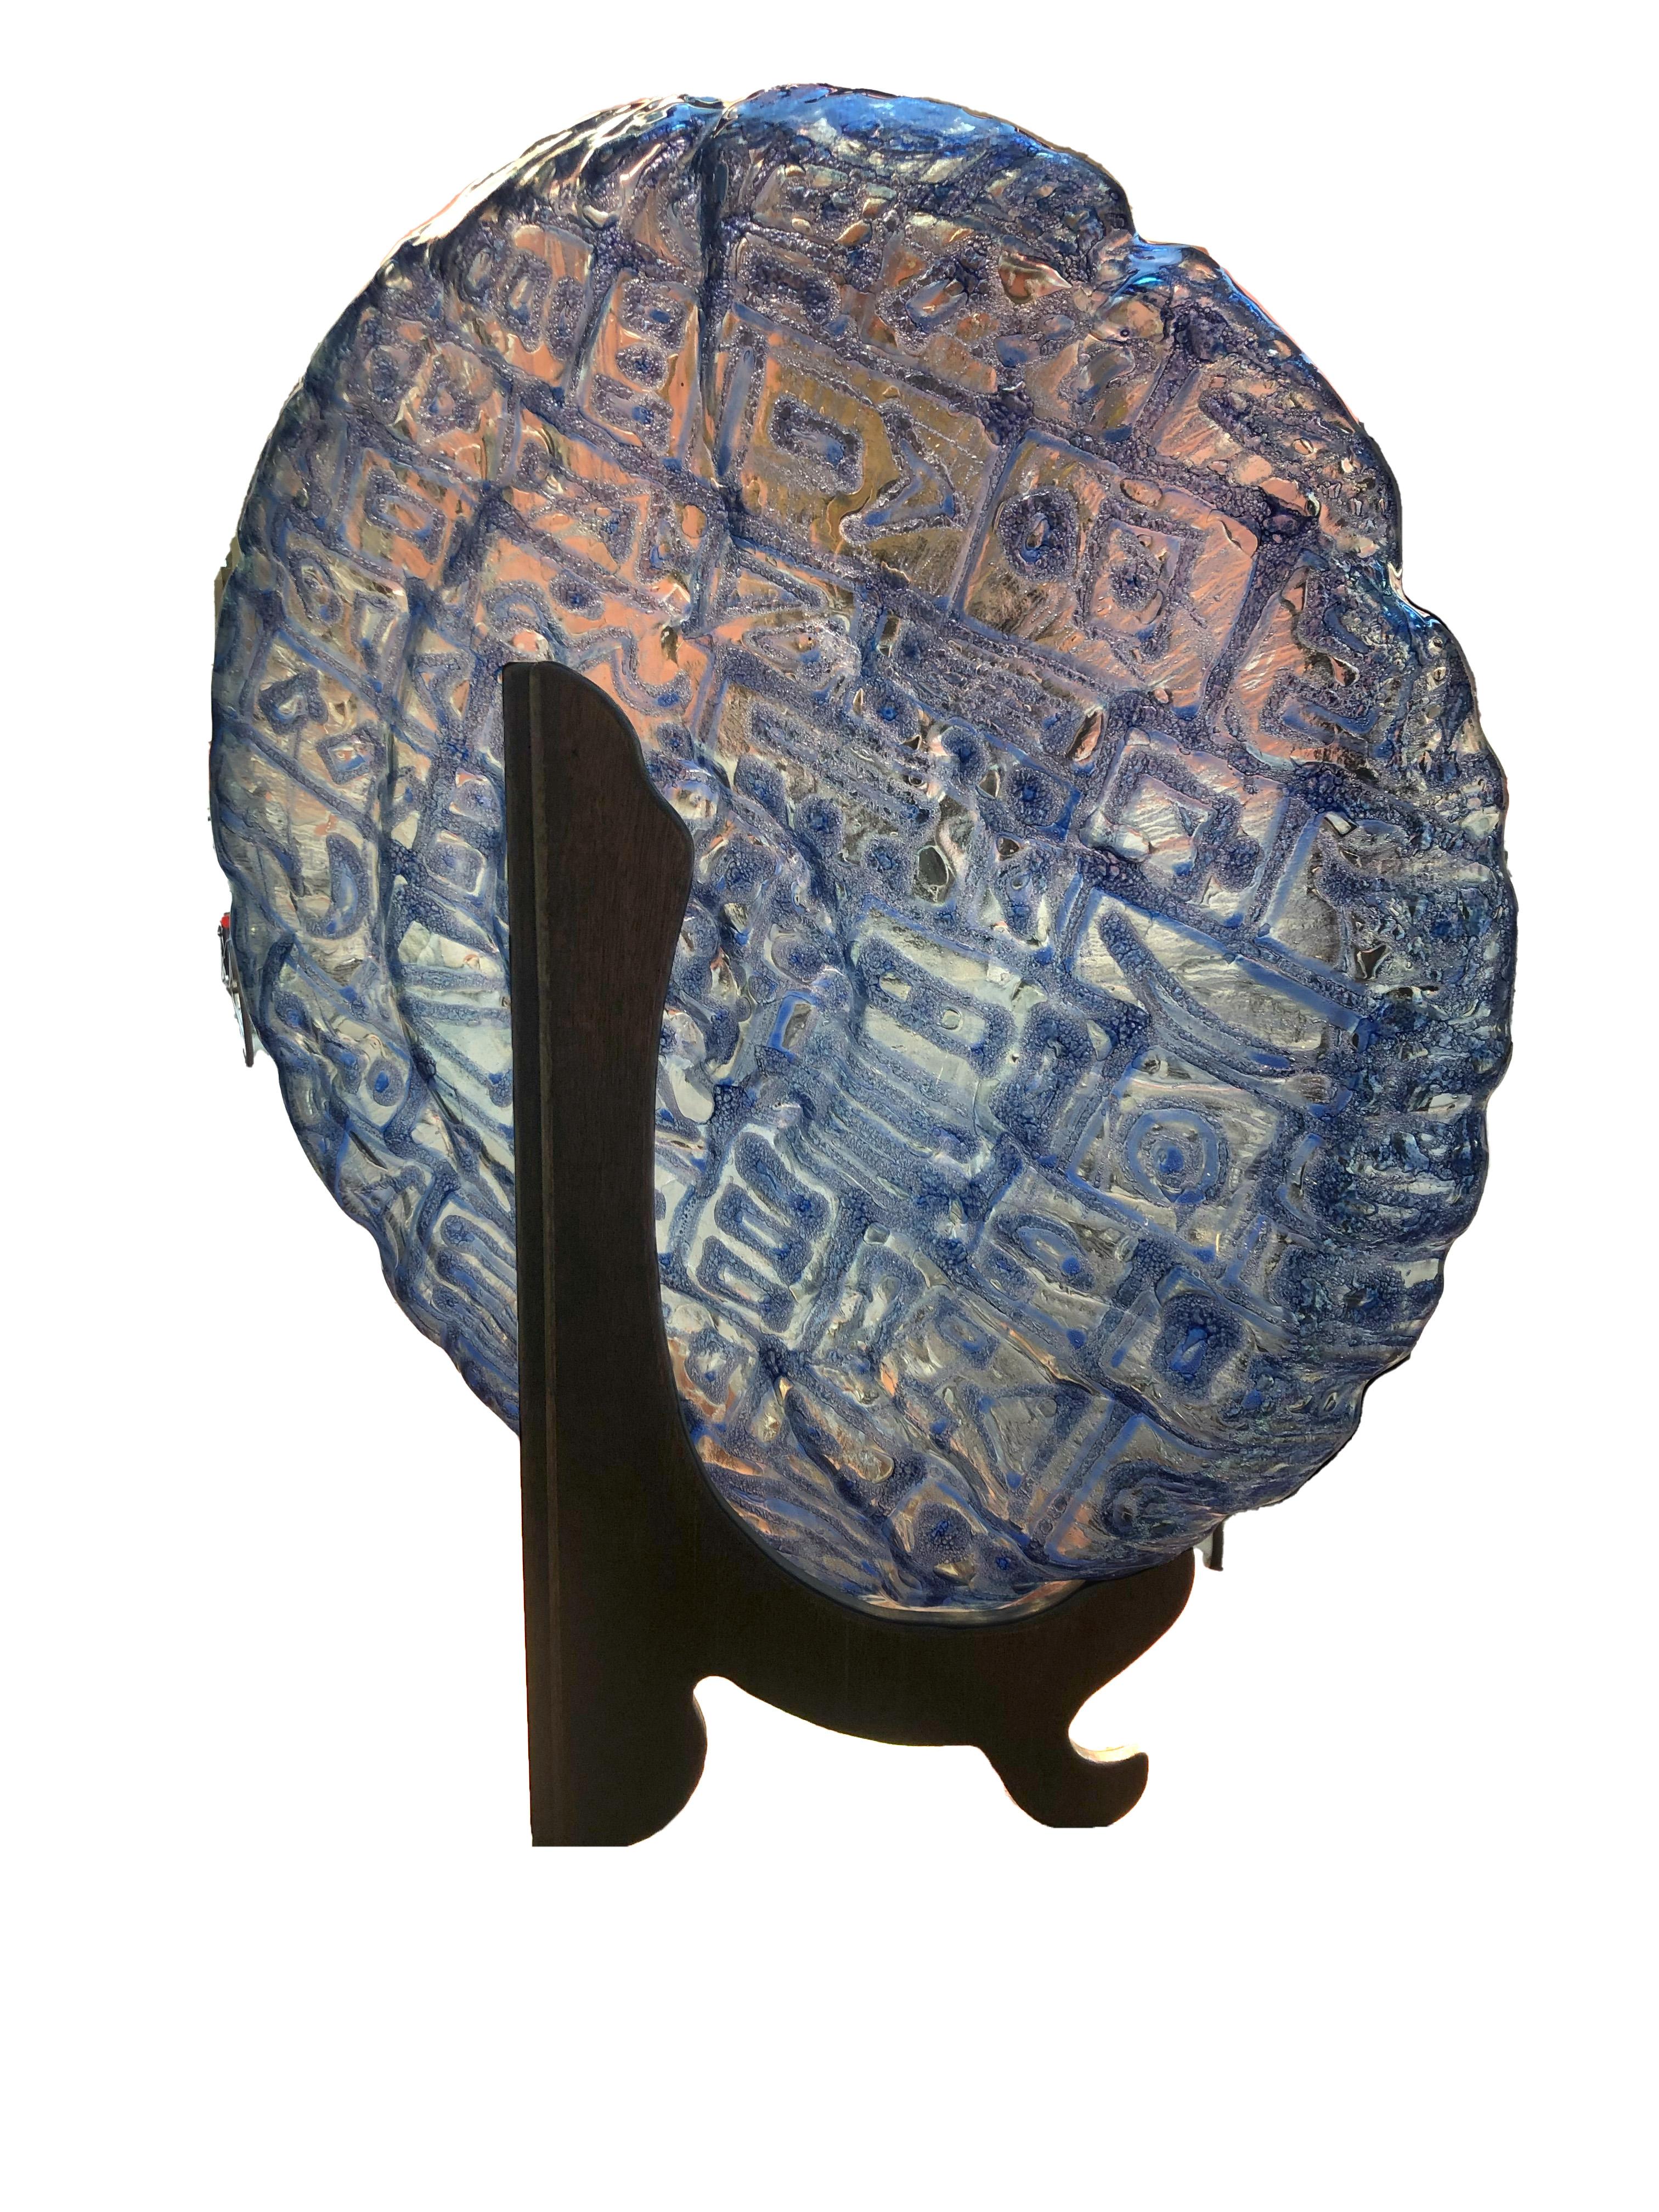 20th Century Italian Venetian Murano Renaissance Revival Very Large Glass Charger, circa 1910 For Sale